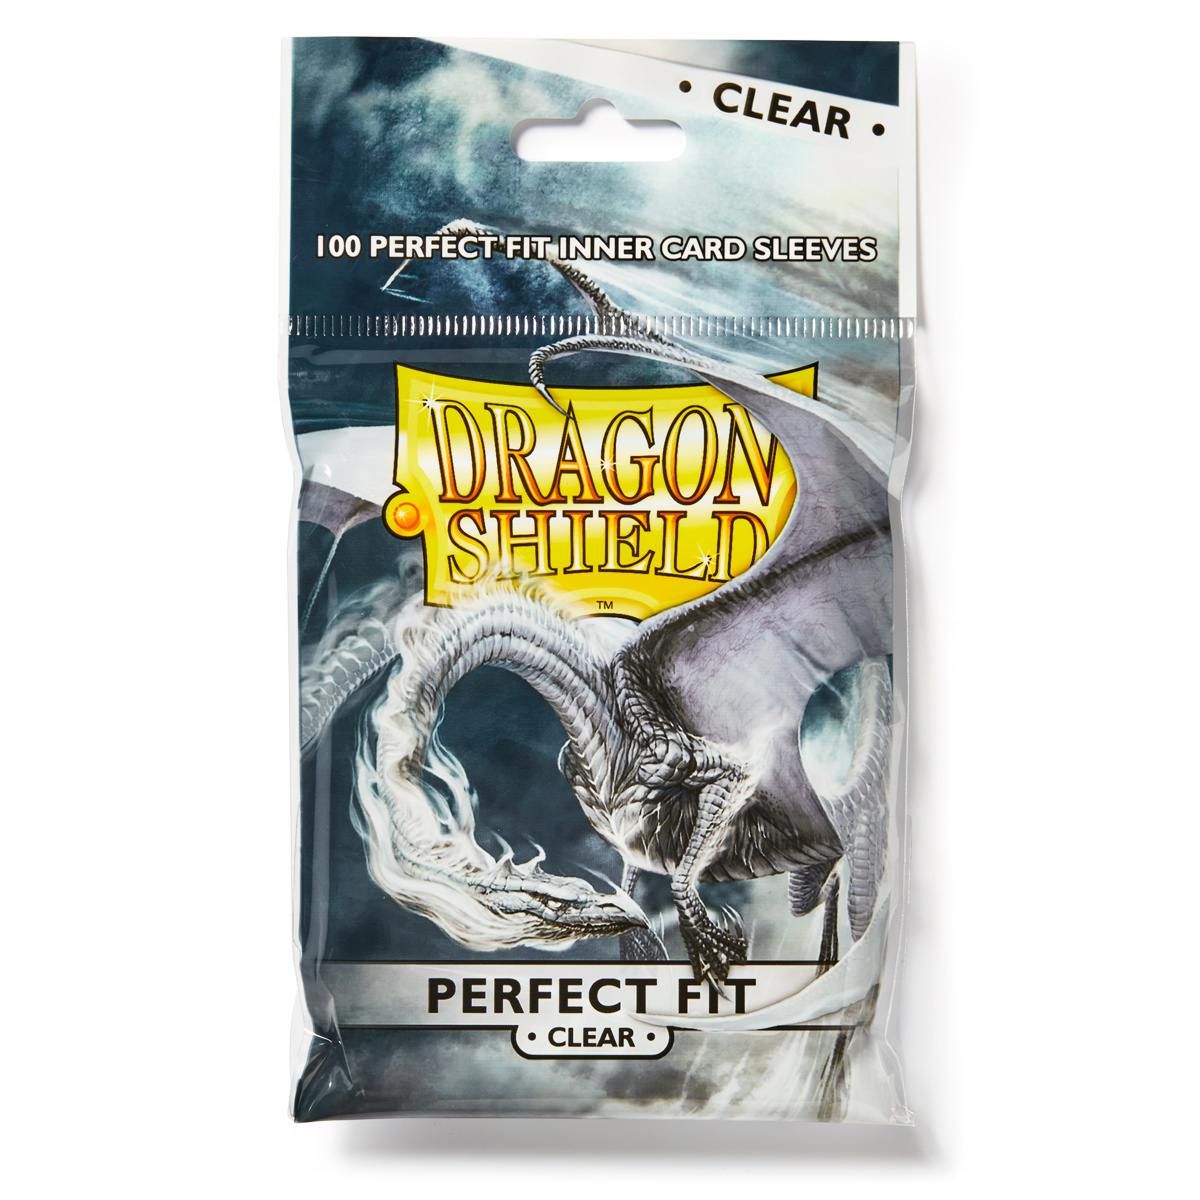 Dragon Shield: Standard Size 100ct Inner Sleeves - Perfect Fit (Clear)